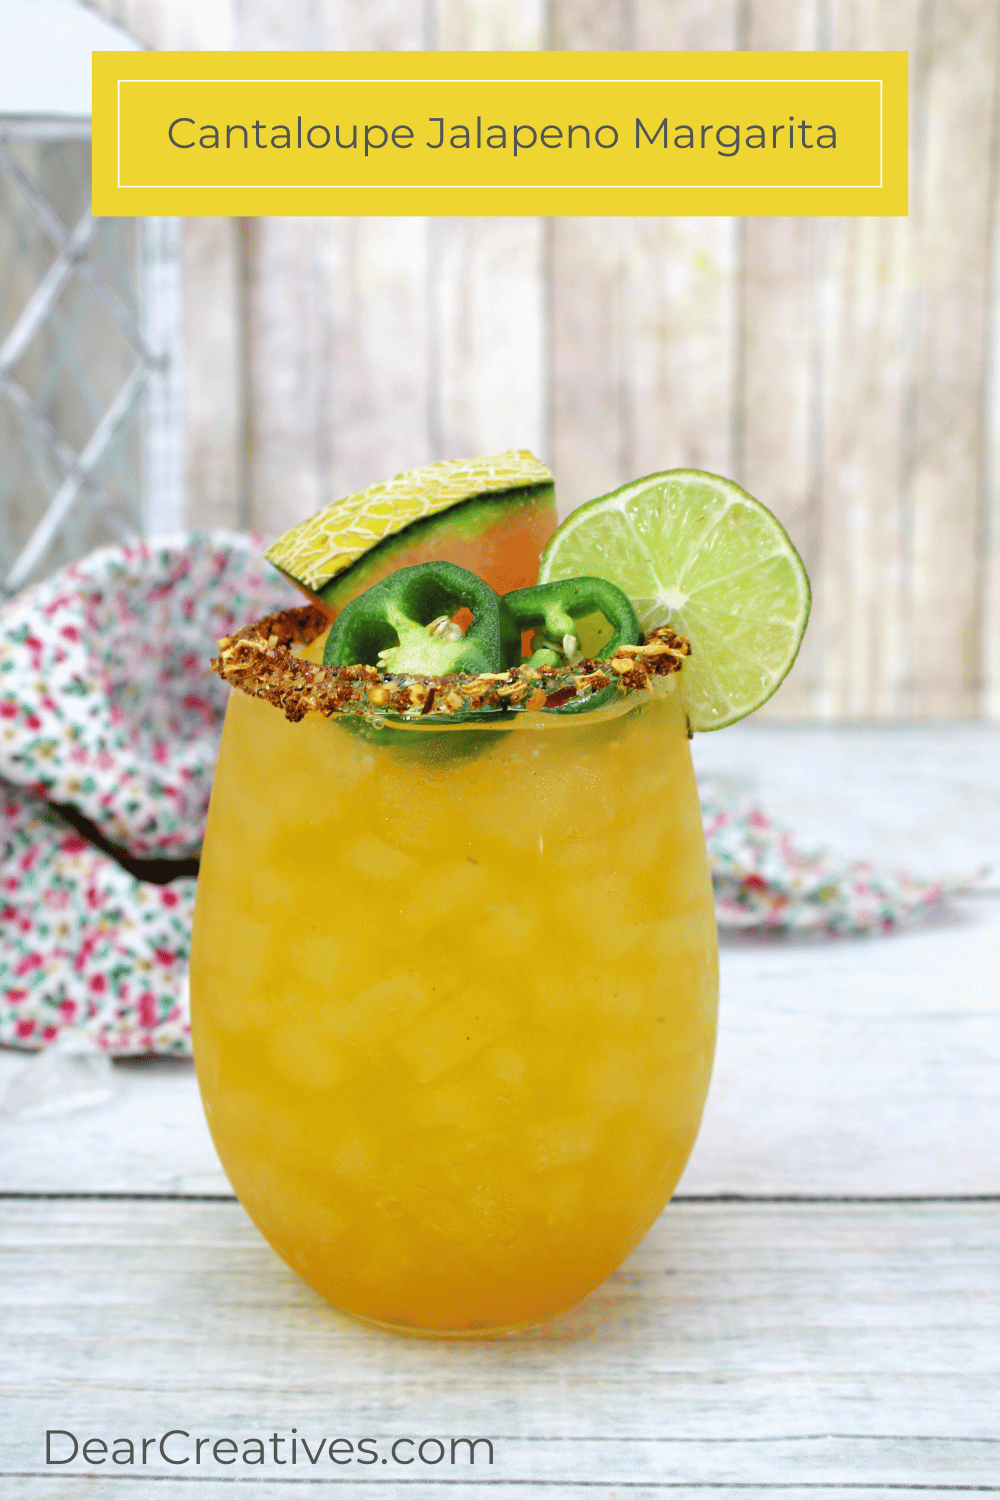 Cantaloupe Jalapeno Margarita - Shake up a cantaloupe margarita by adding jalapeno to it! Make this tasty margarita recipe to enjoy in the spring, summer... Get the drink recipe at DearCreatives.com